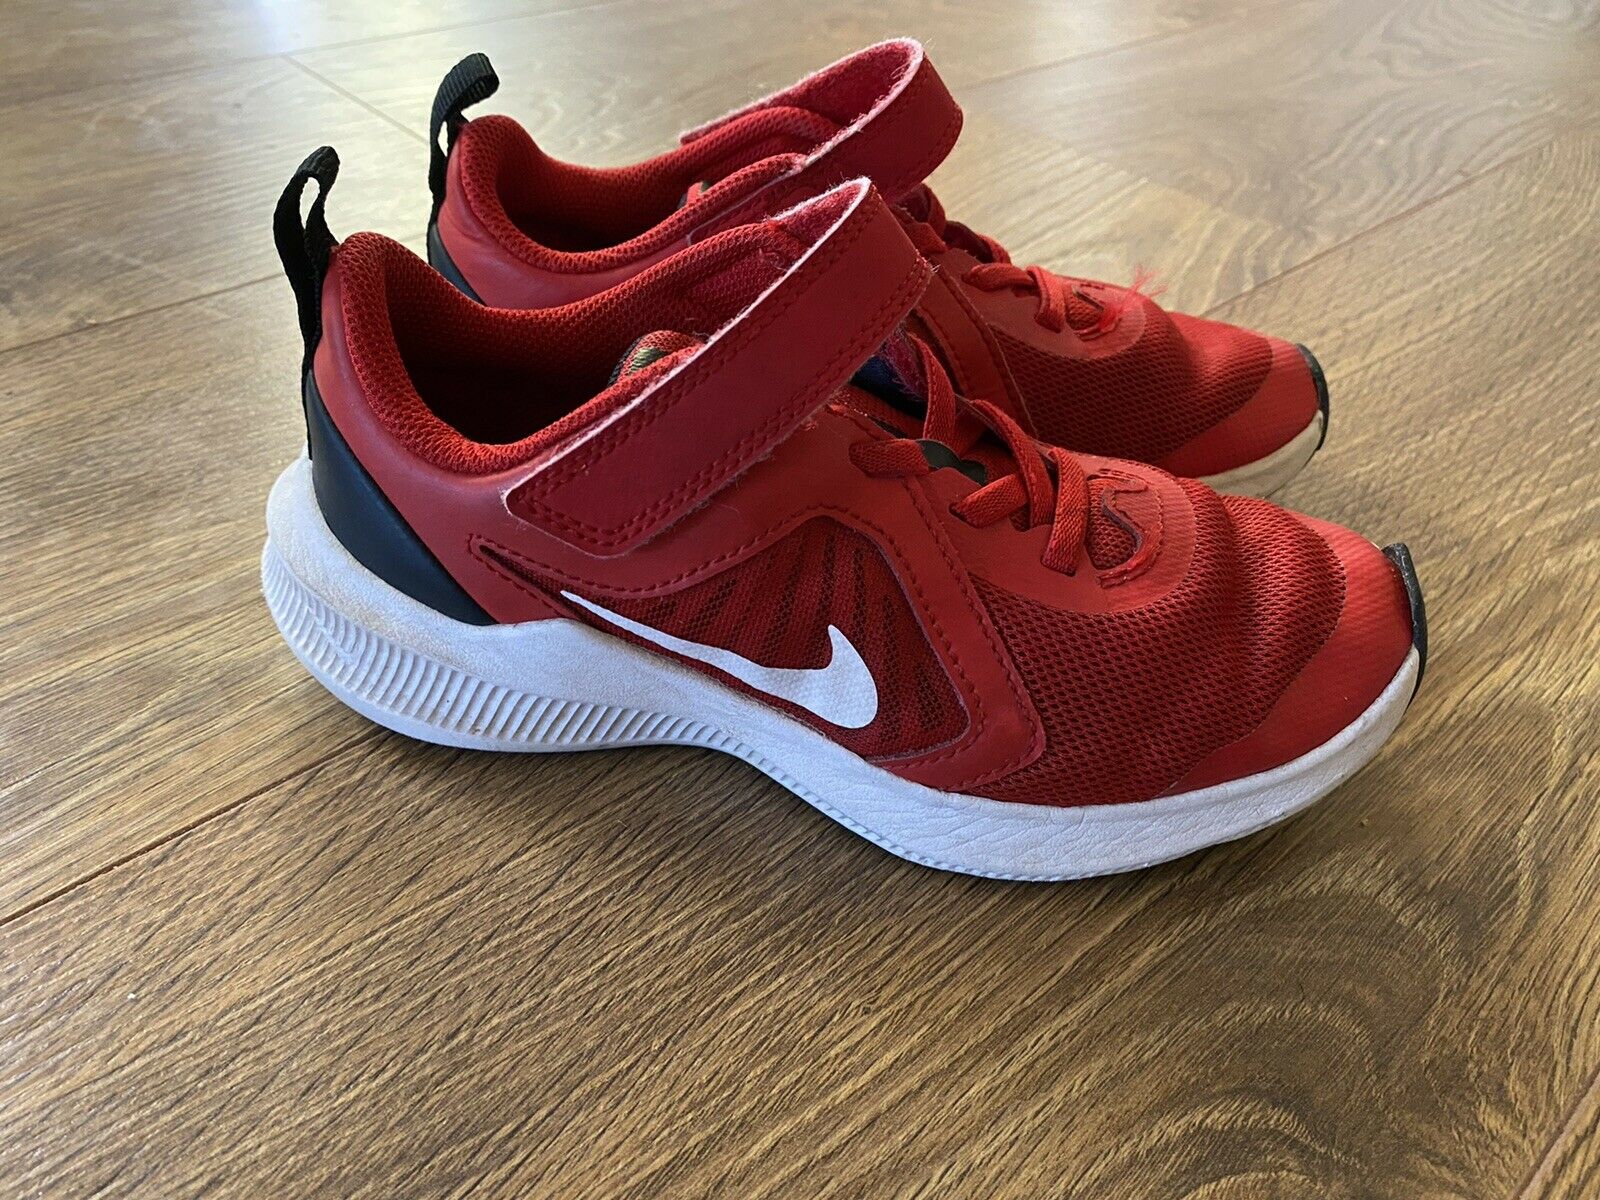 Nike Boys Red Tennis Shoes size 1 youth